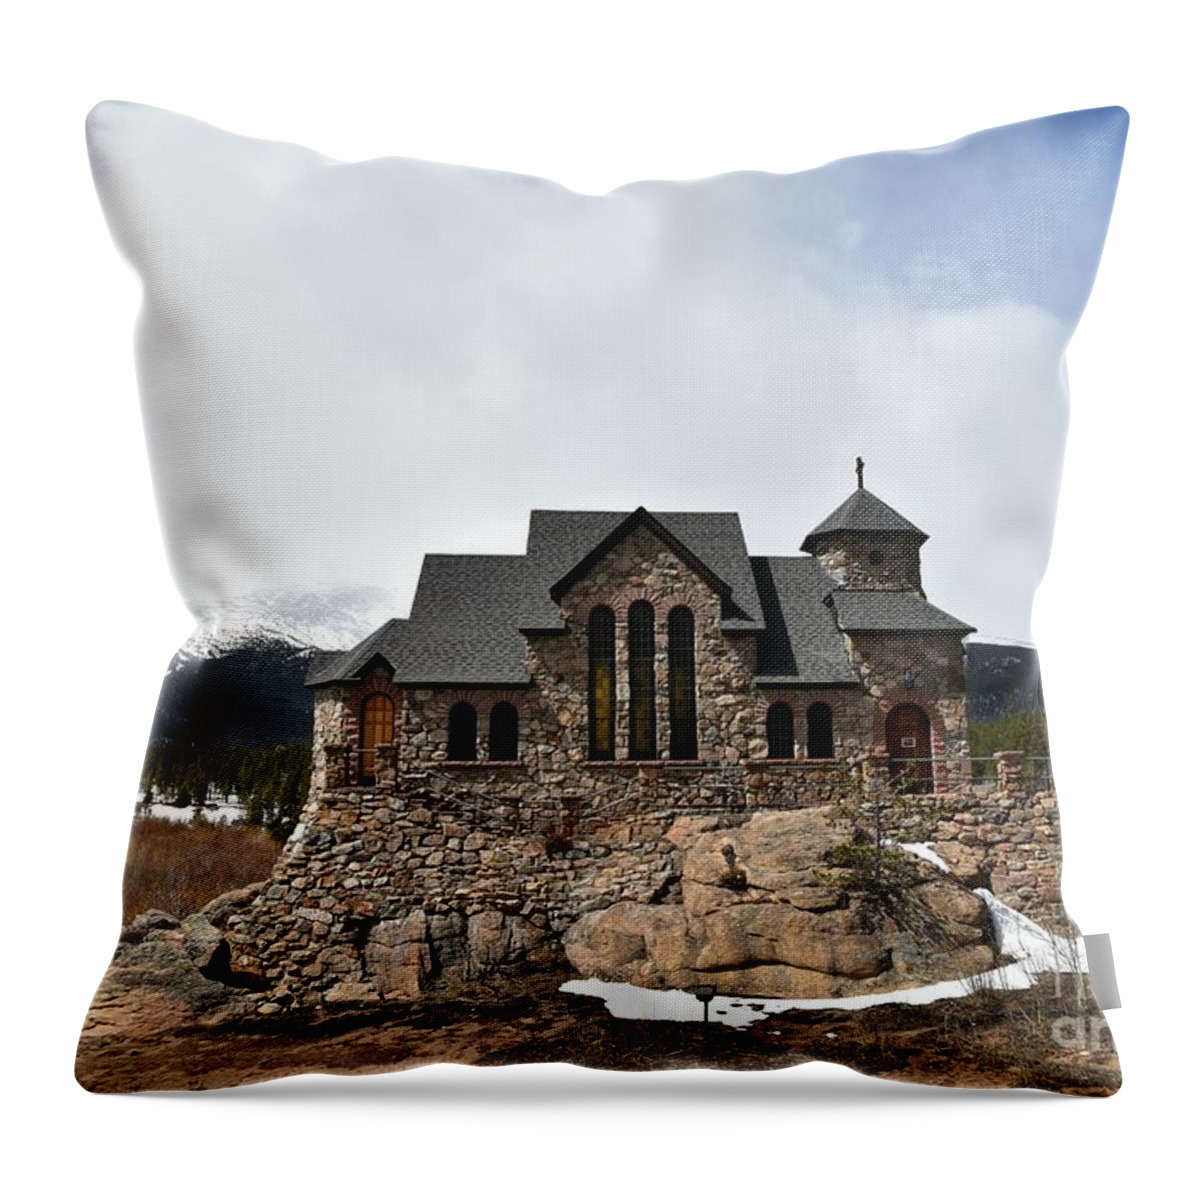 Chapel On The Rocks Throw Pillow featuring the photograph Chapel on the Rocks, Again by Dorrene BrownButterfield